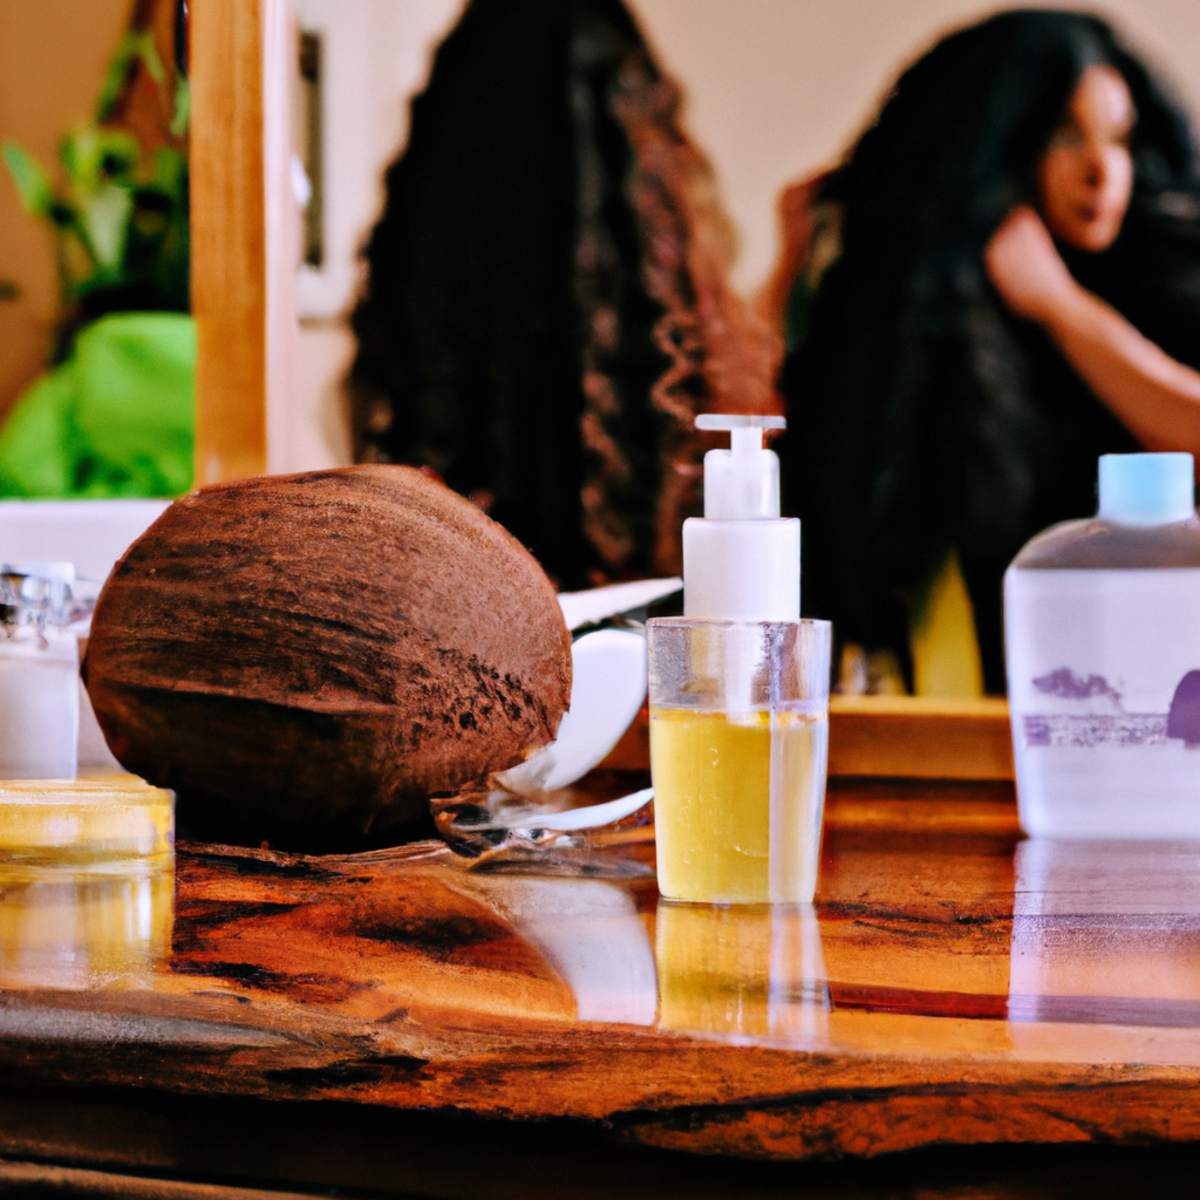 Curly hair care essentials on a wooden table with a woman applying product in the background.